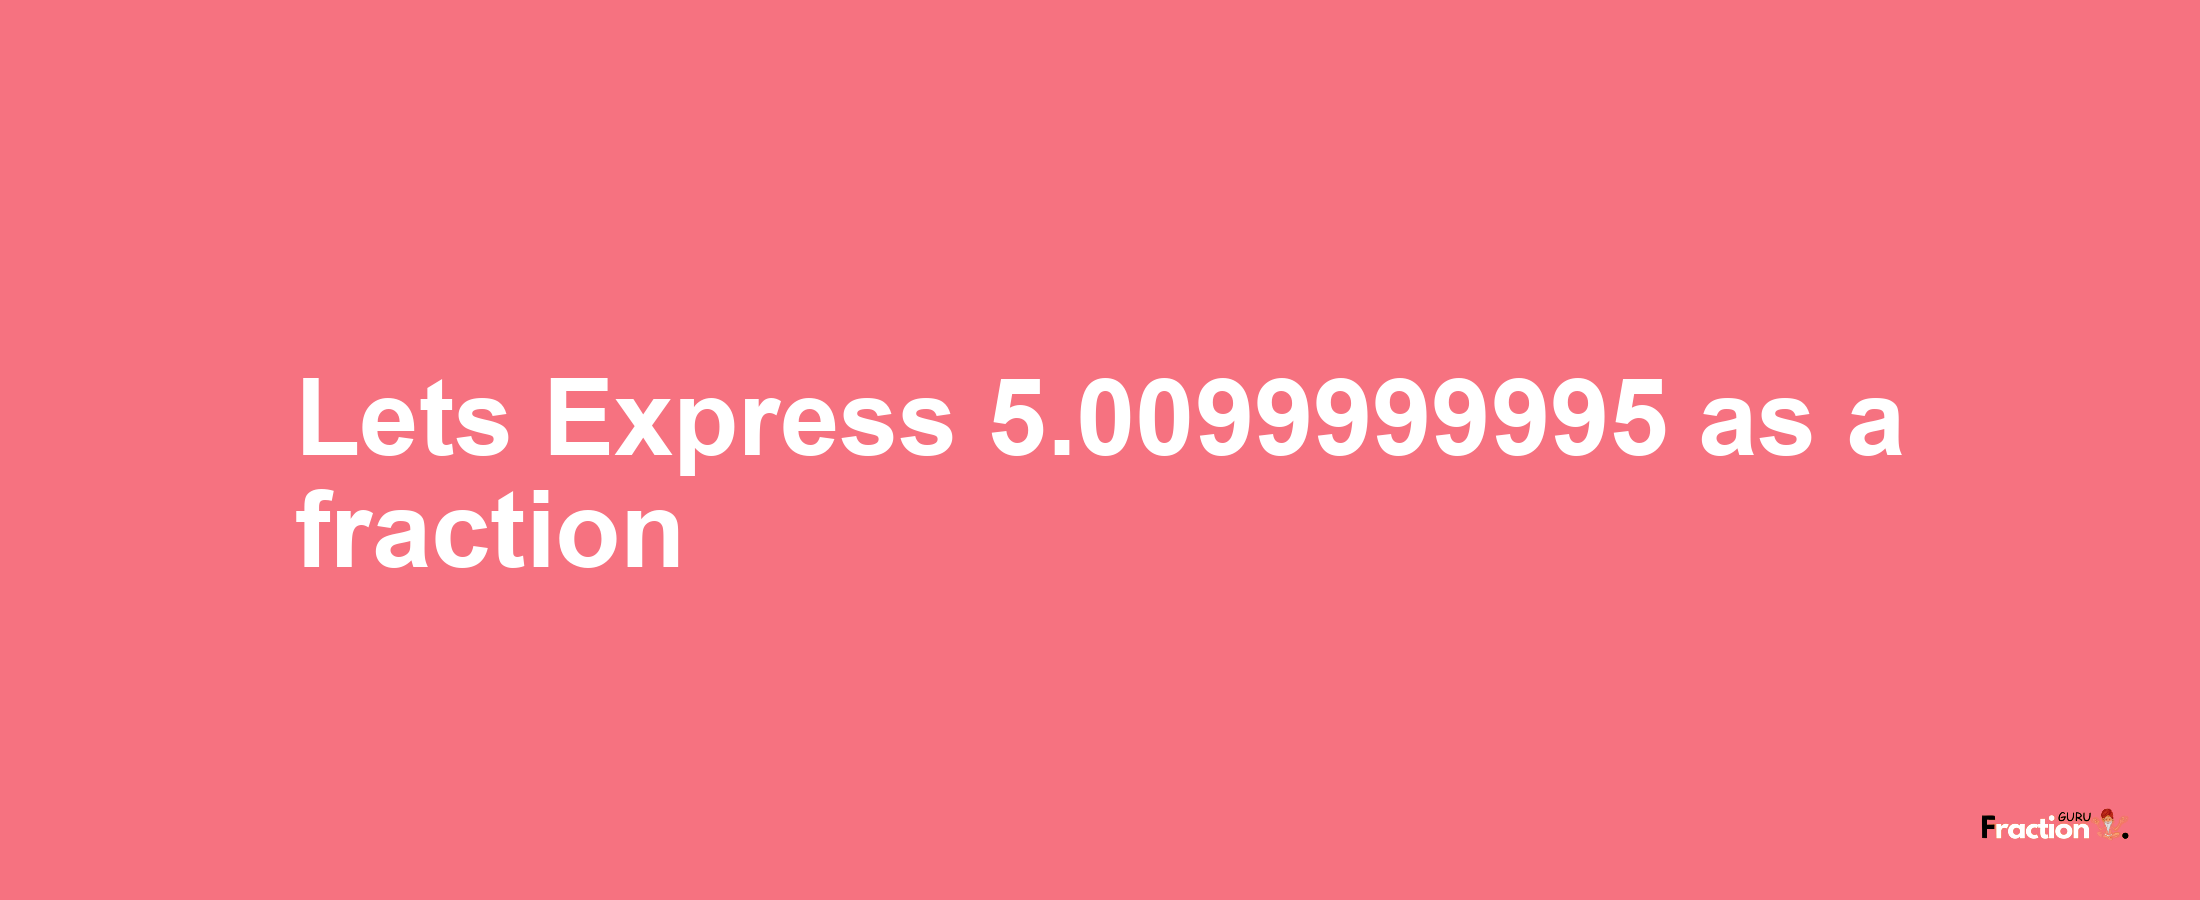 Lets Express 5.0099999995 as afraction